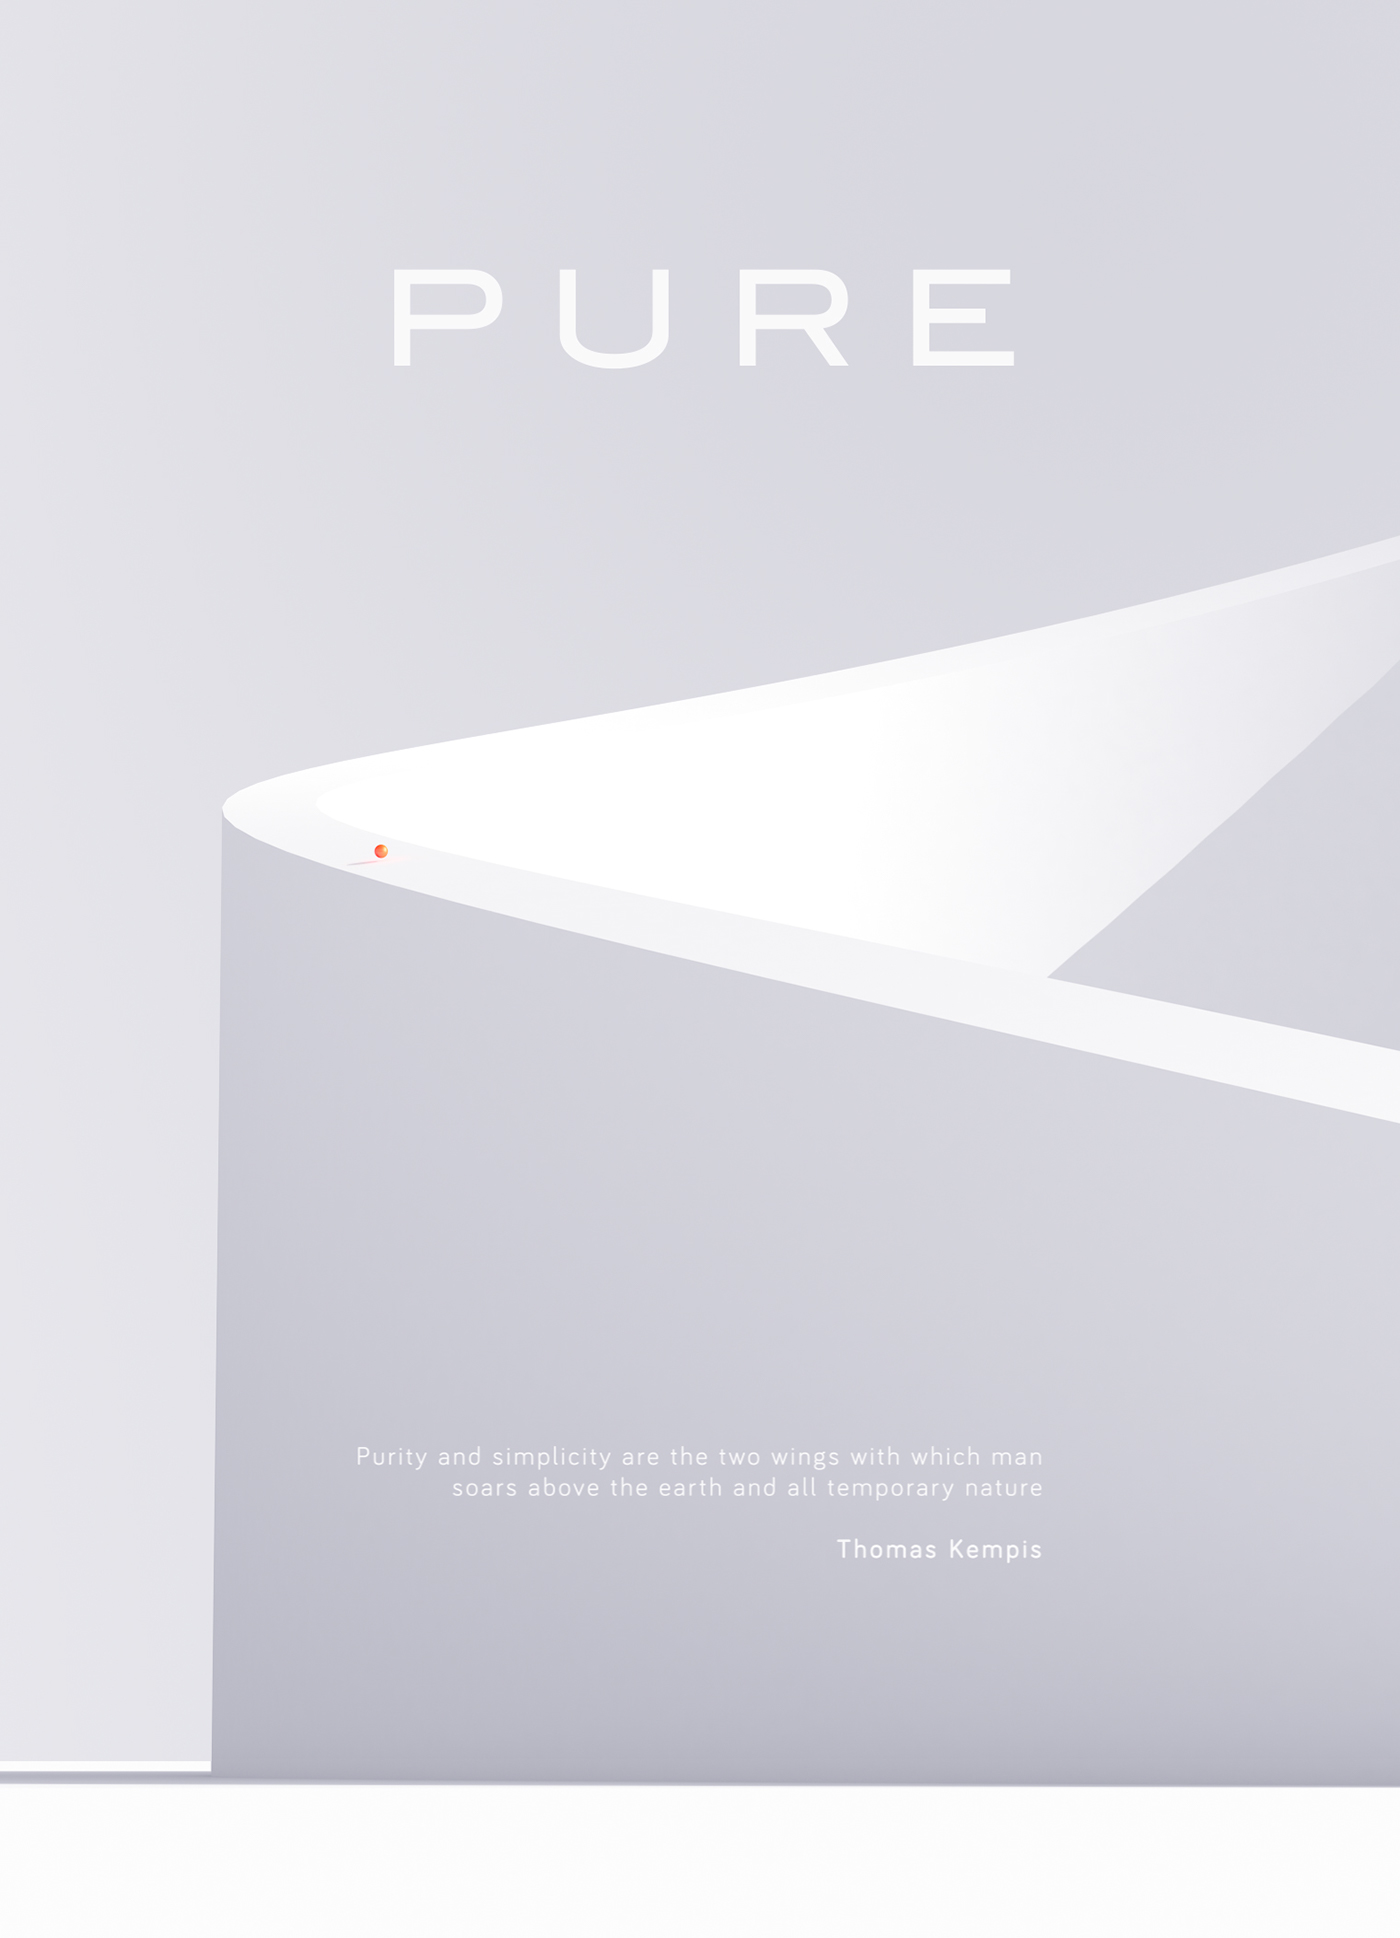 pause pure White Space  purity philosophy  inspire